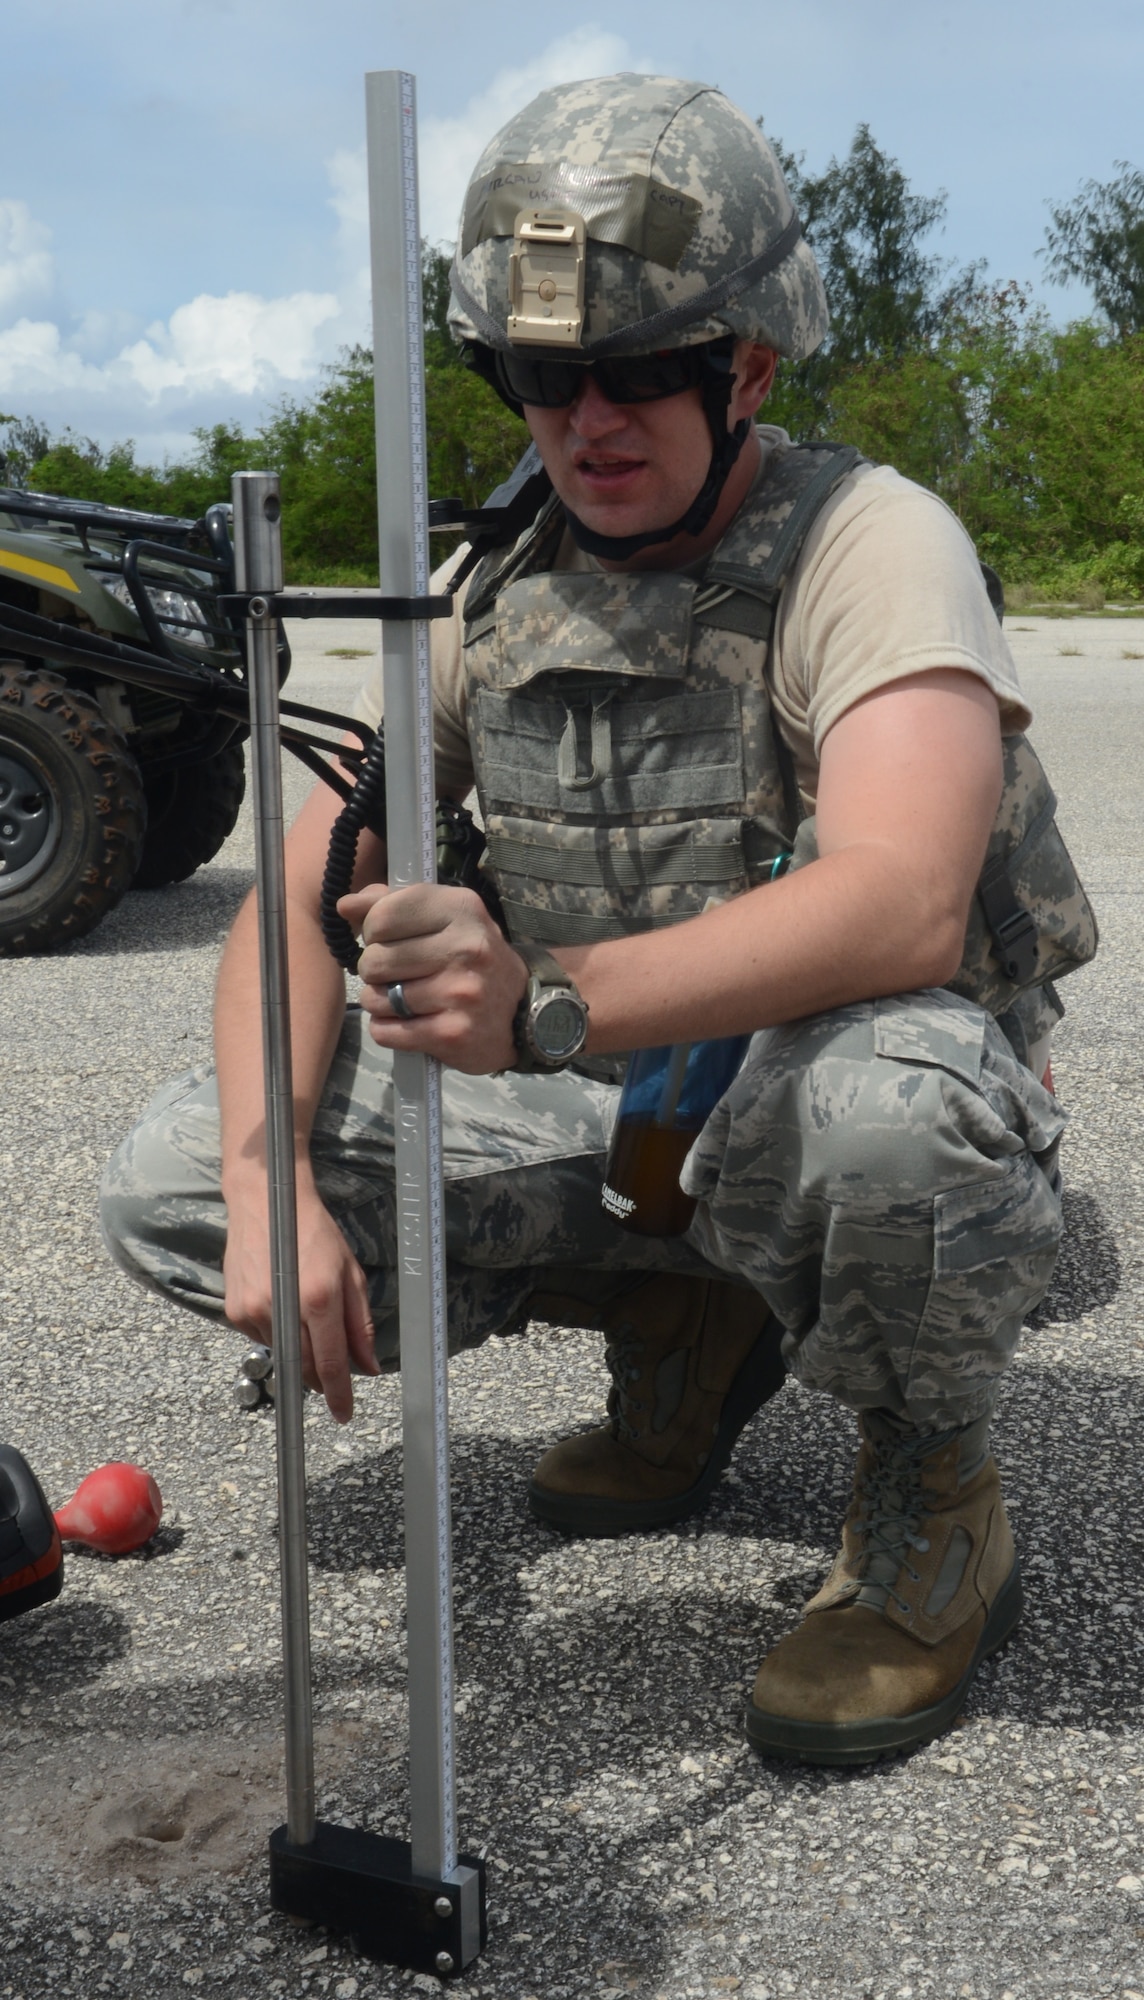 Capt. Clark Morgan, 36th Mobility Readiness Squadron officer in charge of contingency engineering, sets up the dynamic cone penetrometer to assess the durability of the pavement, Oct. 29, 2013, on Naval Base Guam. The DCP is hammered into the pavement to test if it is strong enough to handle large Department of Defense aircraft landing without cracking the asphalt so the airstrip will remain usable. (U.S. Air Force photo by Airman 1st Class Emily A. Bradley/Released)